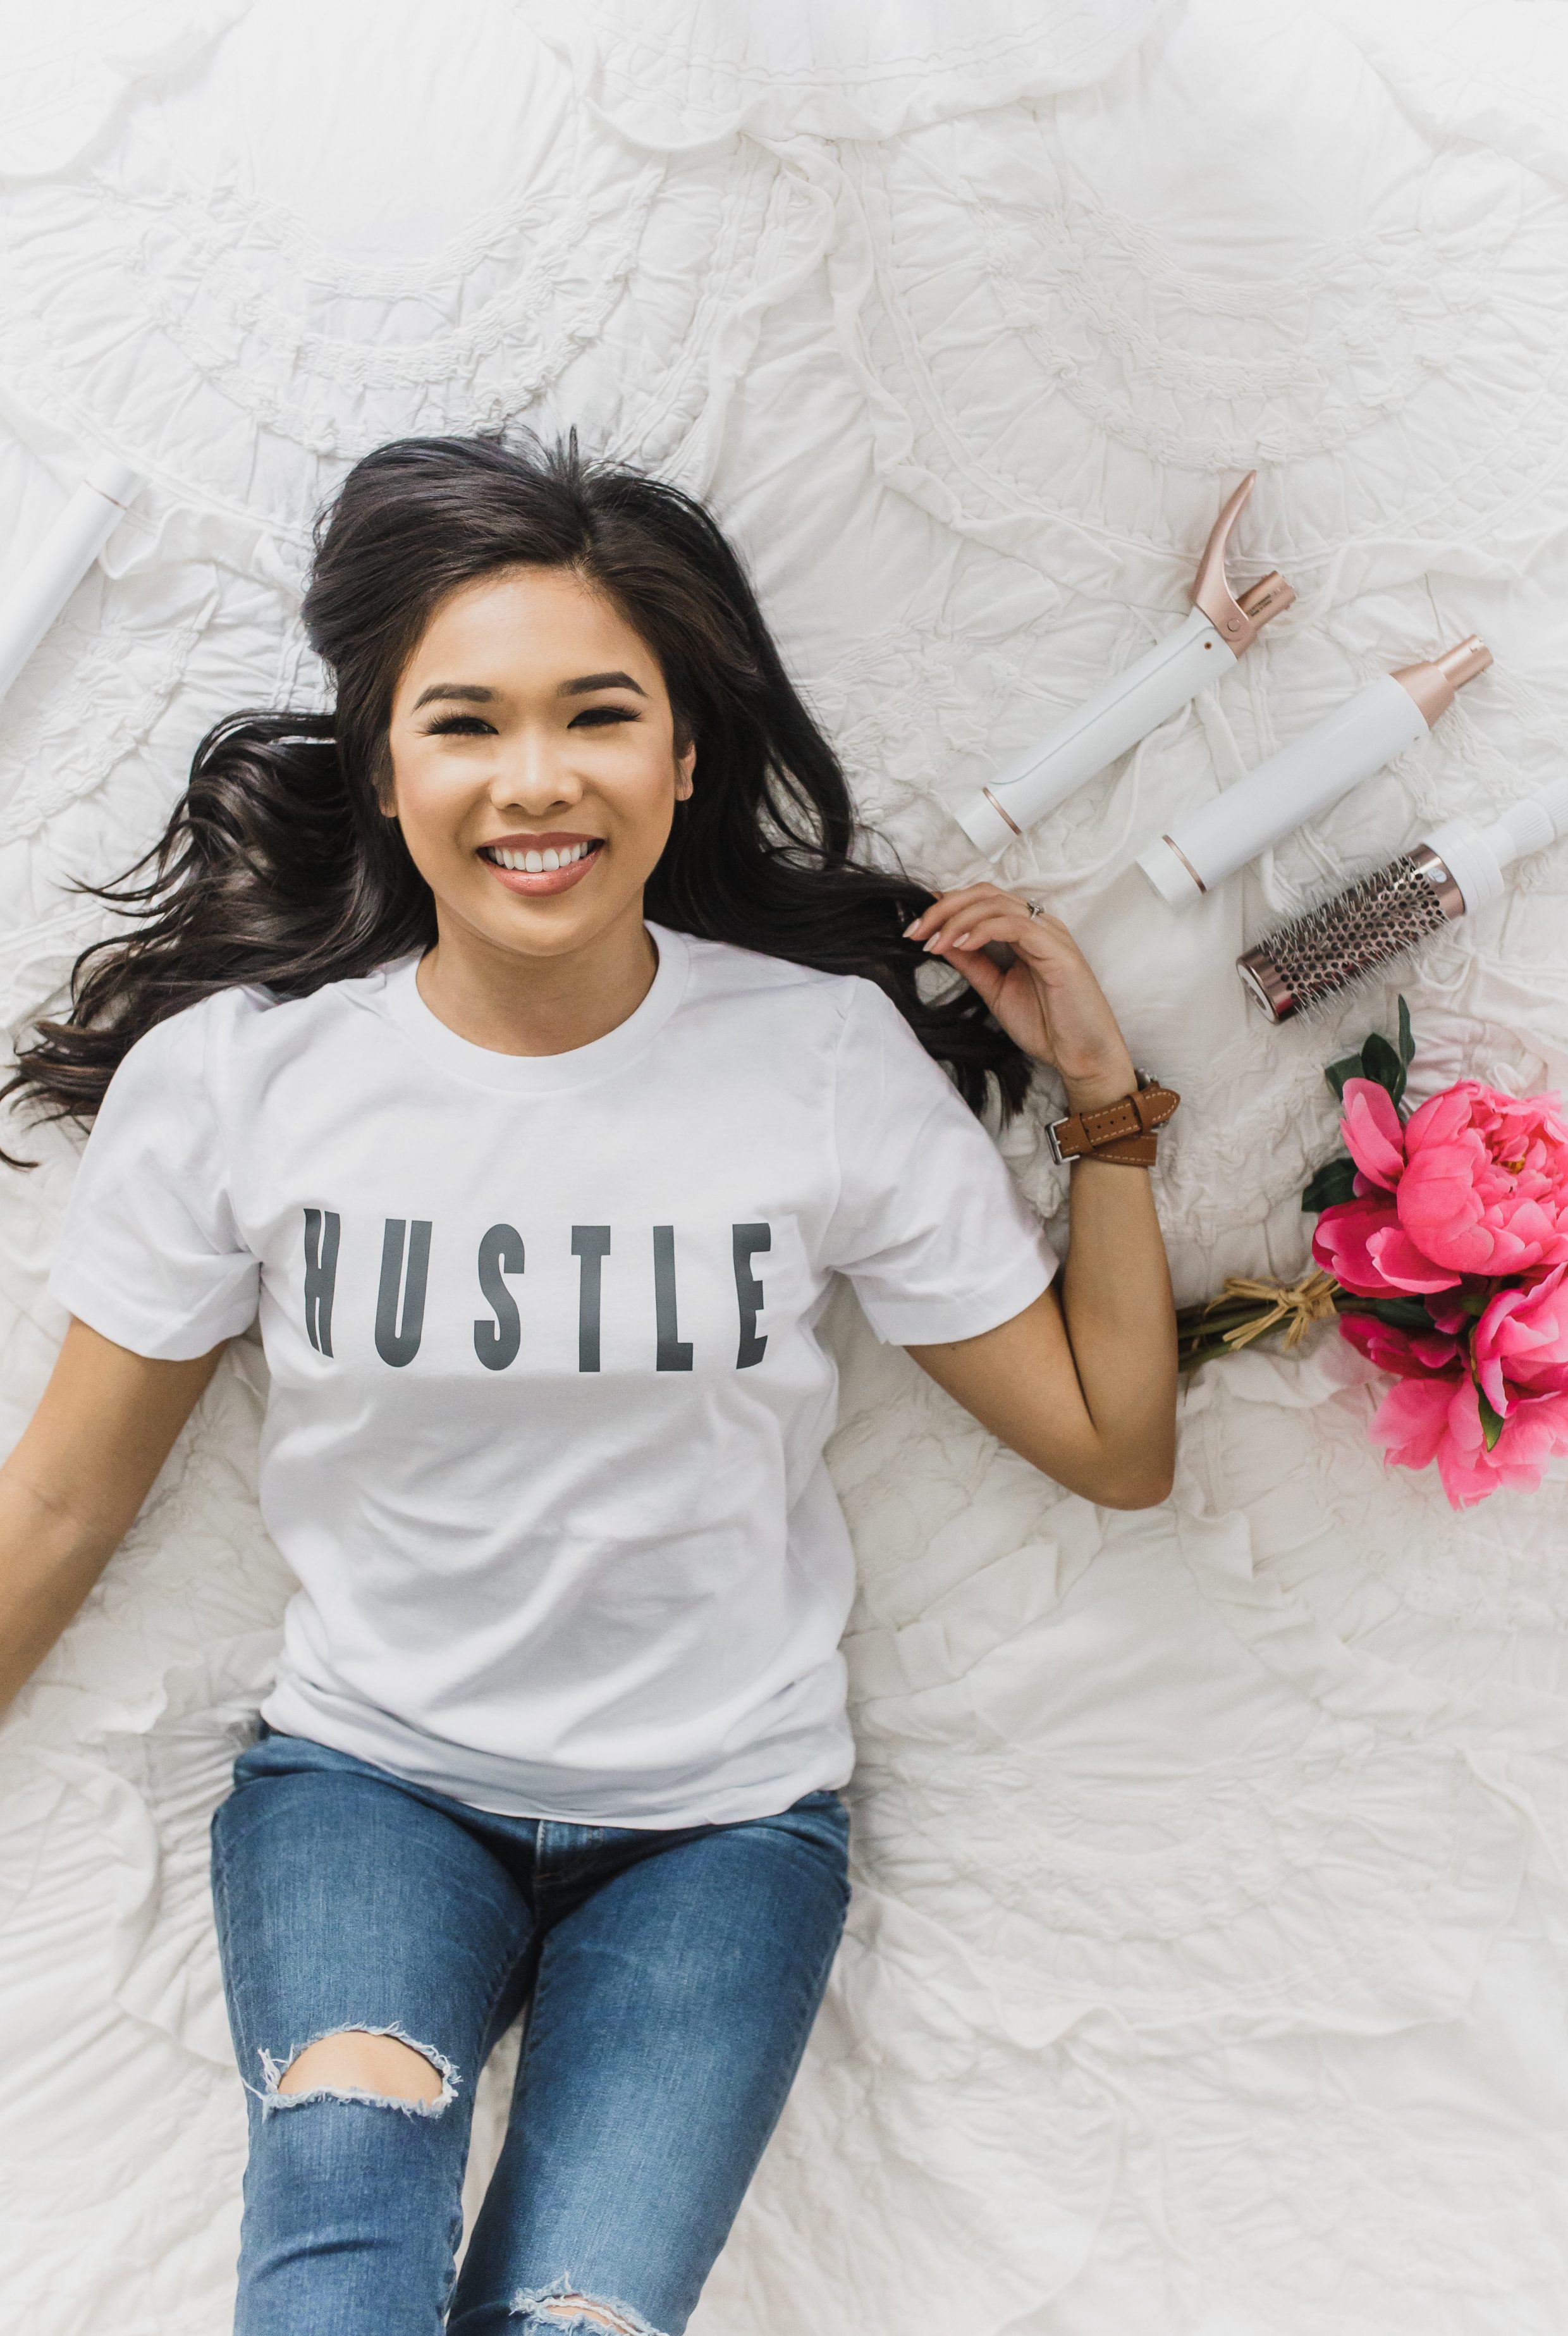 Hustle :: The Power Within and How I Style My Hair - Color & Chic